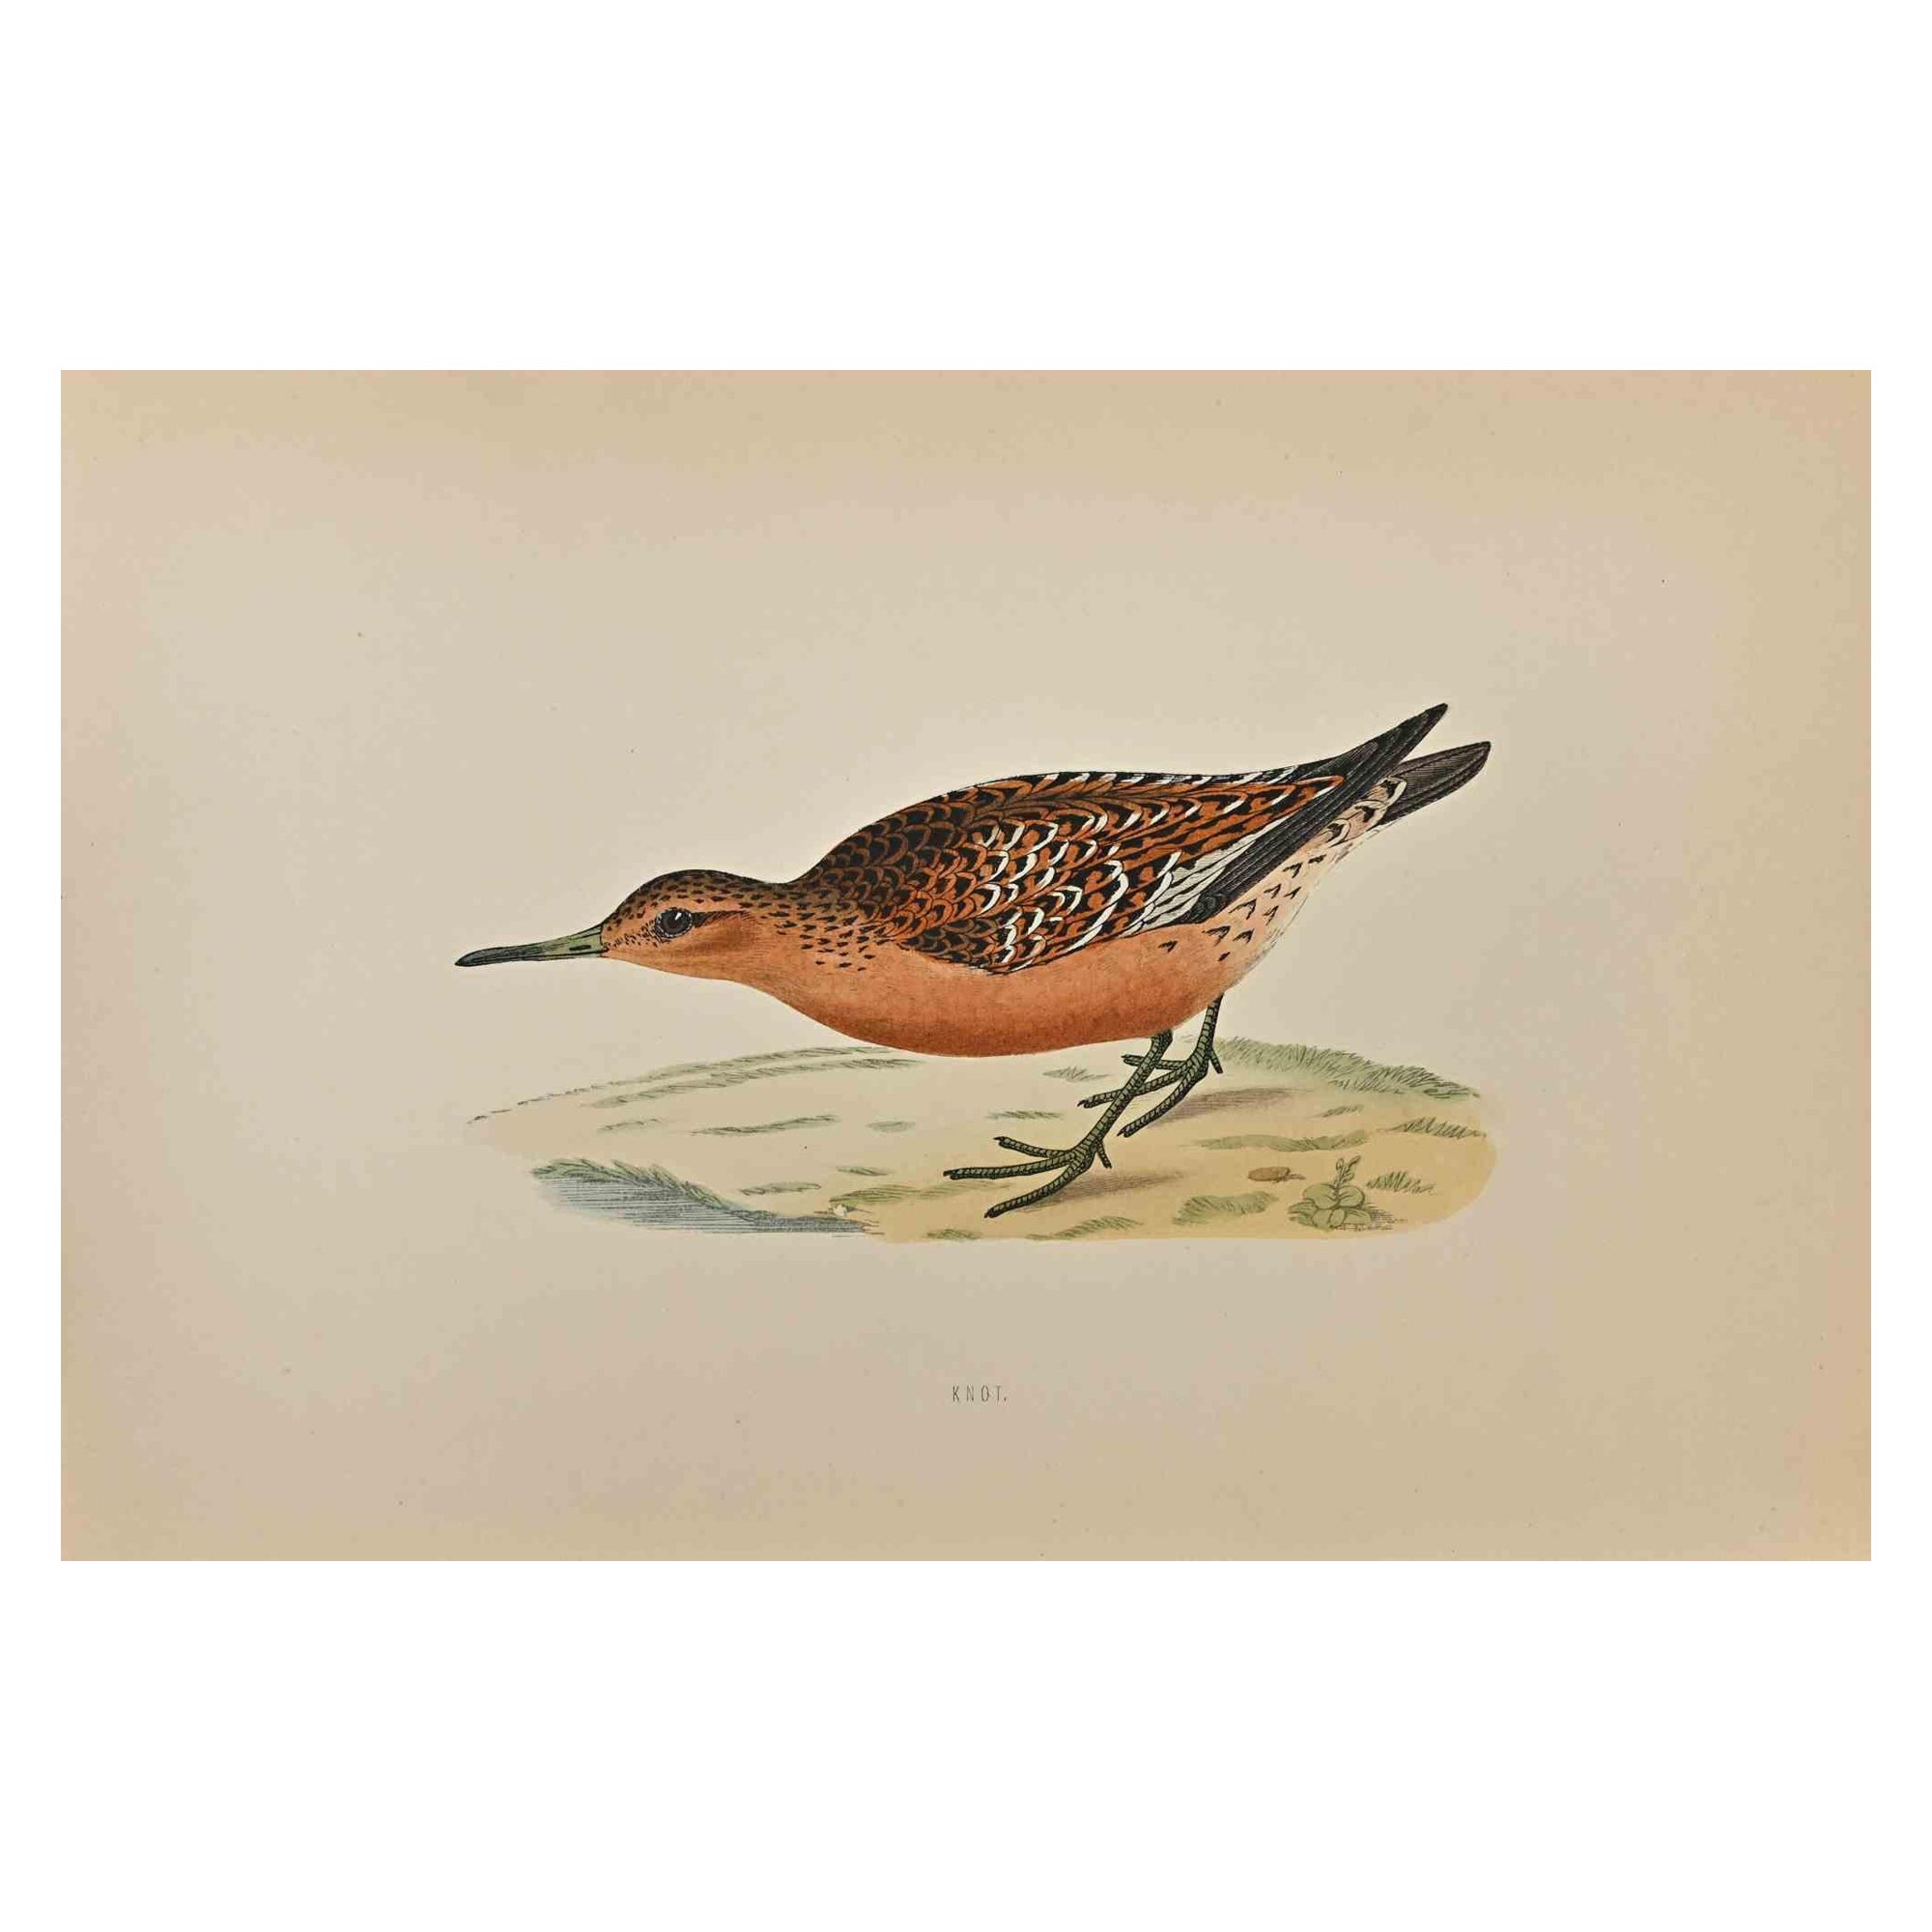 Knot is a modern artwork realized in 1870 by the British artist Alexander Francis Lydon (1836-1917) . 

Woodcut print, hand colored, published by London, Bell & Sons, 1870.  Name of the bird printed in plate. This work is part of a print suite